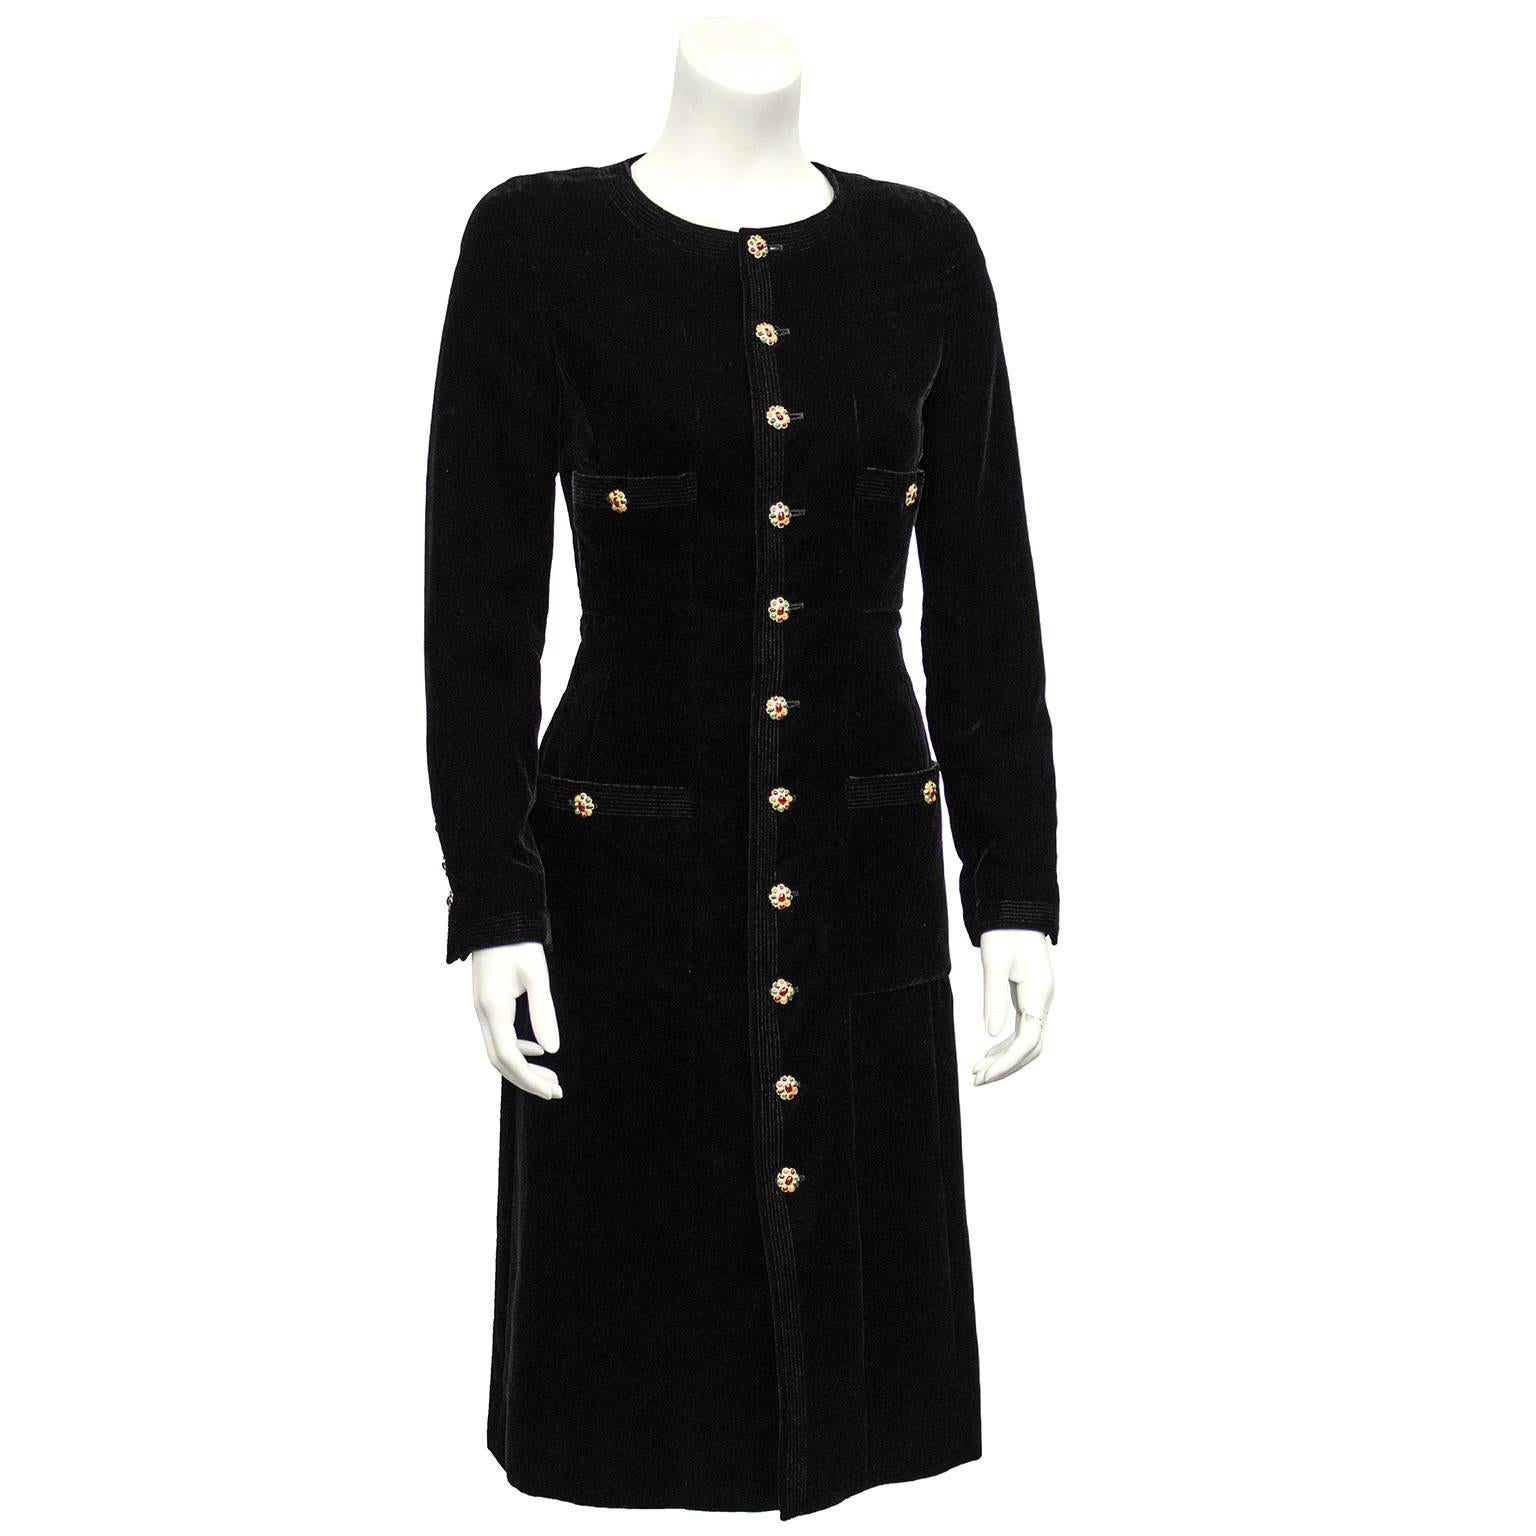 Really beautiful Chanel jet black velvet dress from the Autumn 1996 collection. Long sleeve and mid calf length. Detailed with 11 original poured glass buttons with various jewel tones. Matching buttons on the four pockets, 2 at bust and 2 at hips.